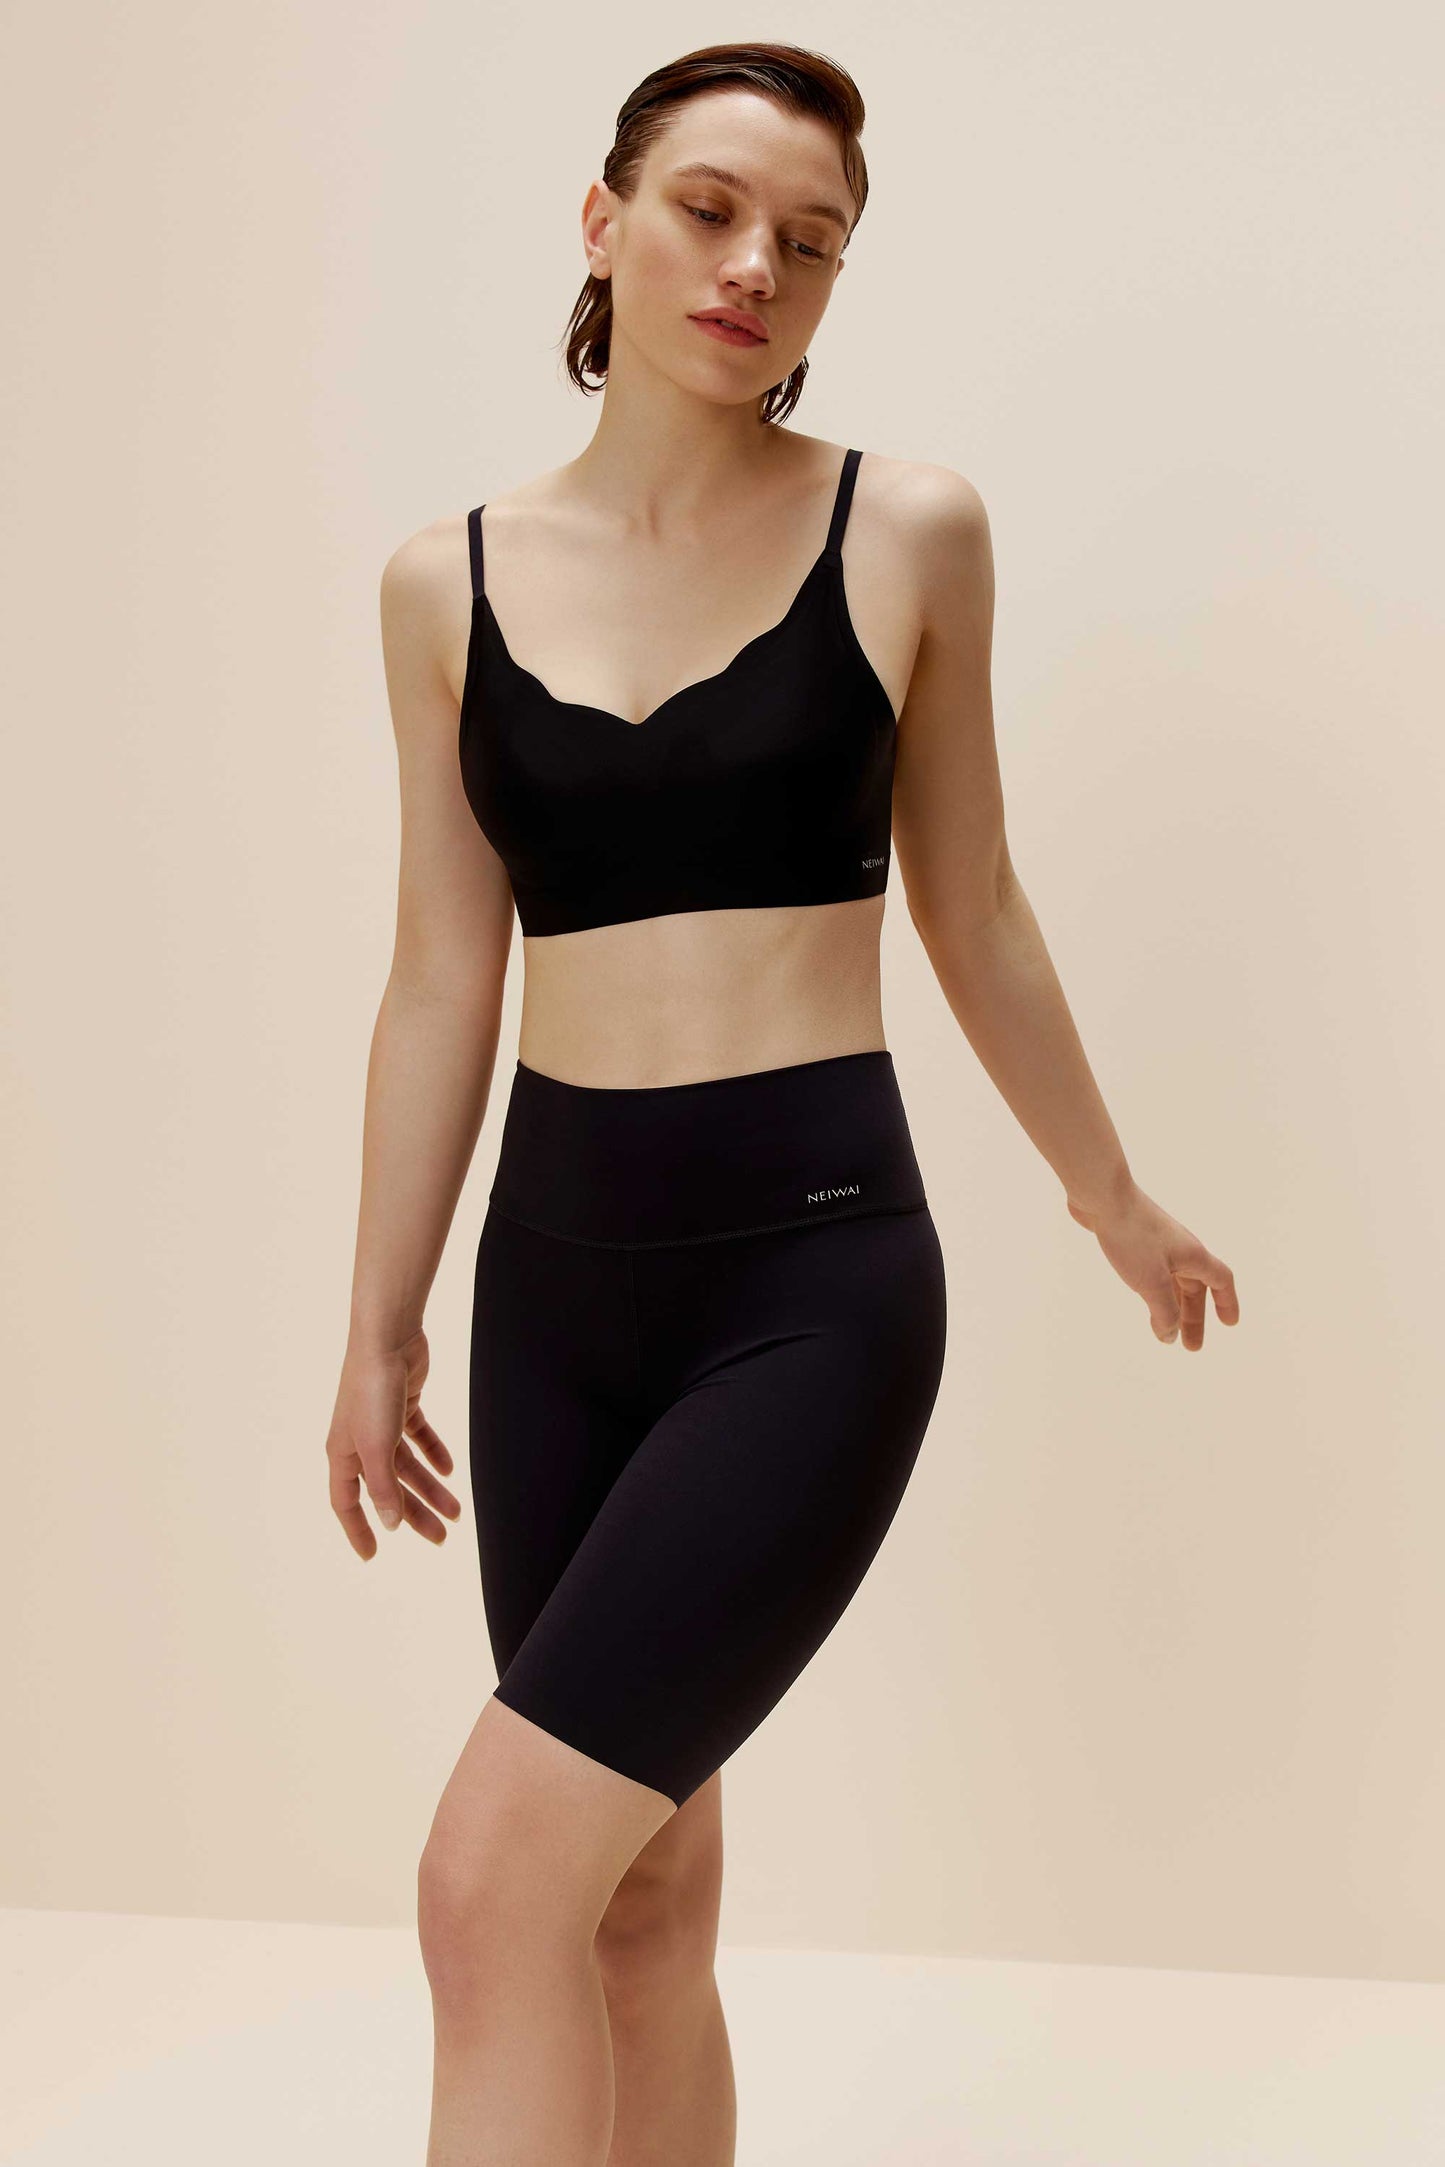 woman in black color bra with wavy rim details and black biker shorts